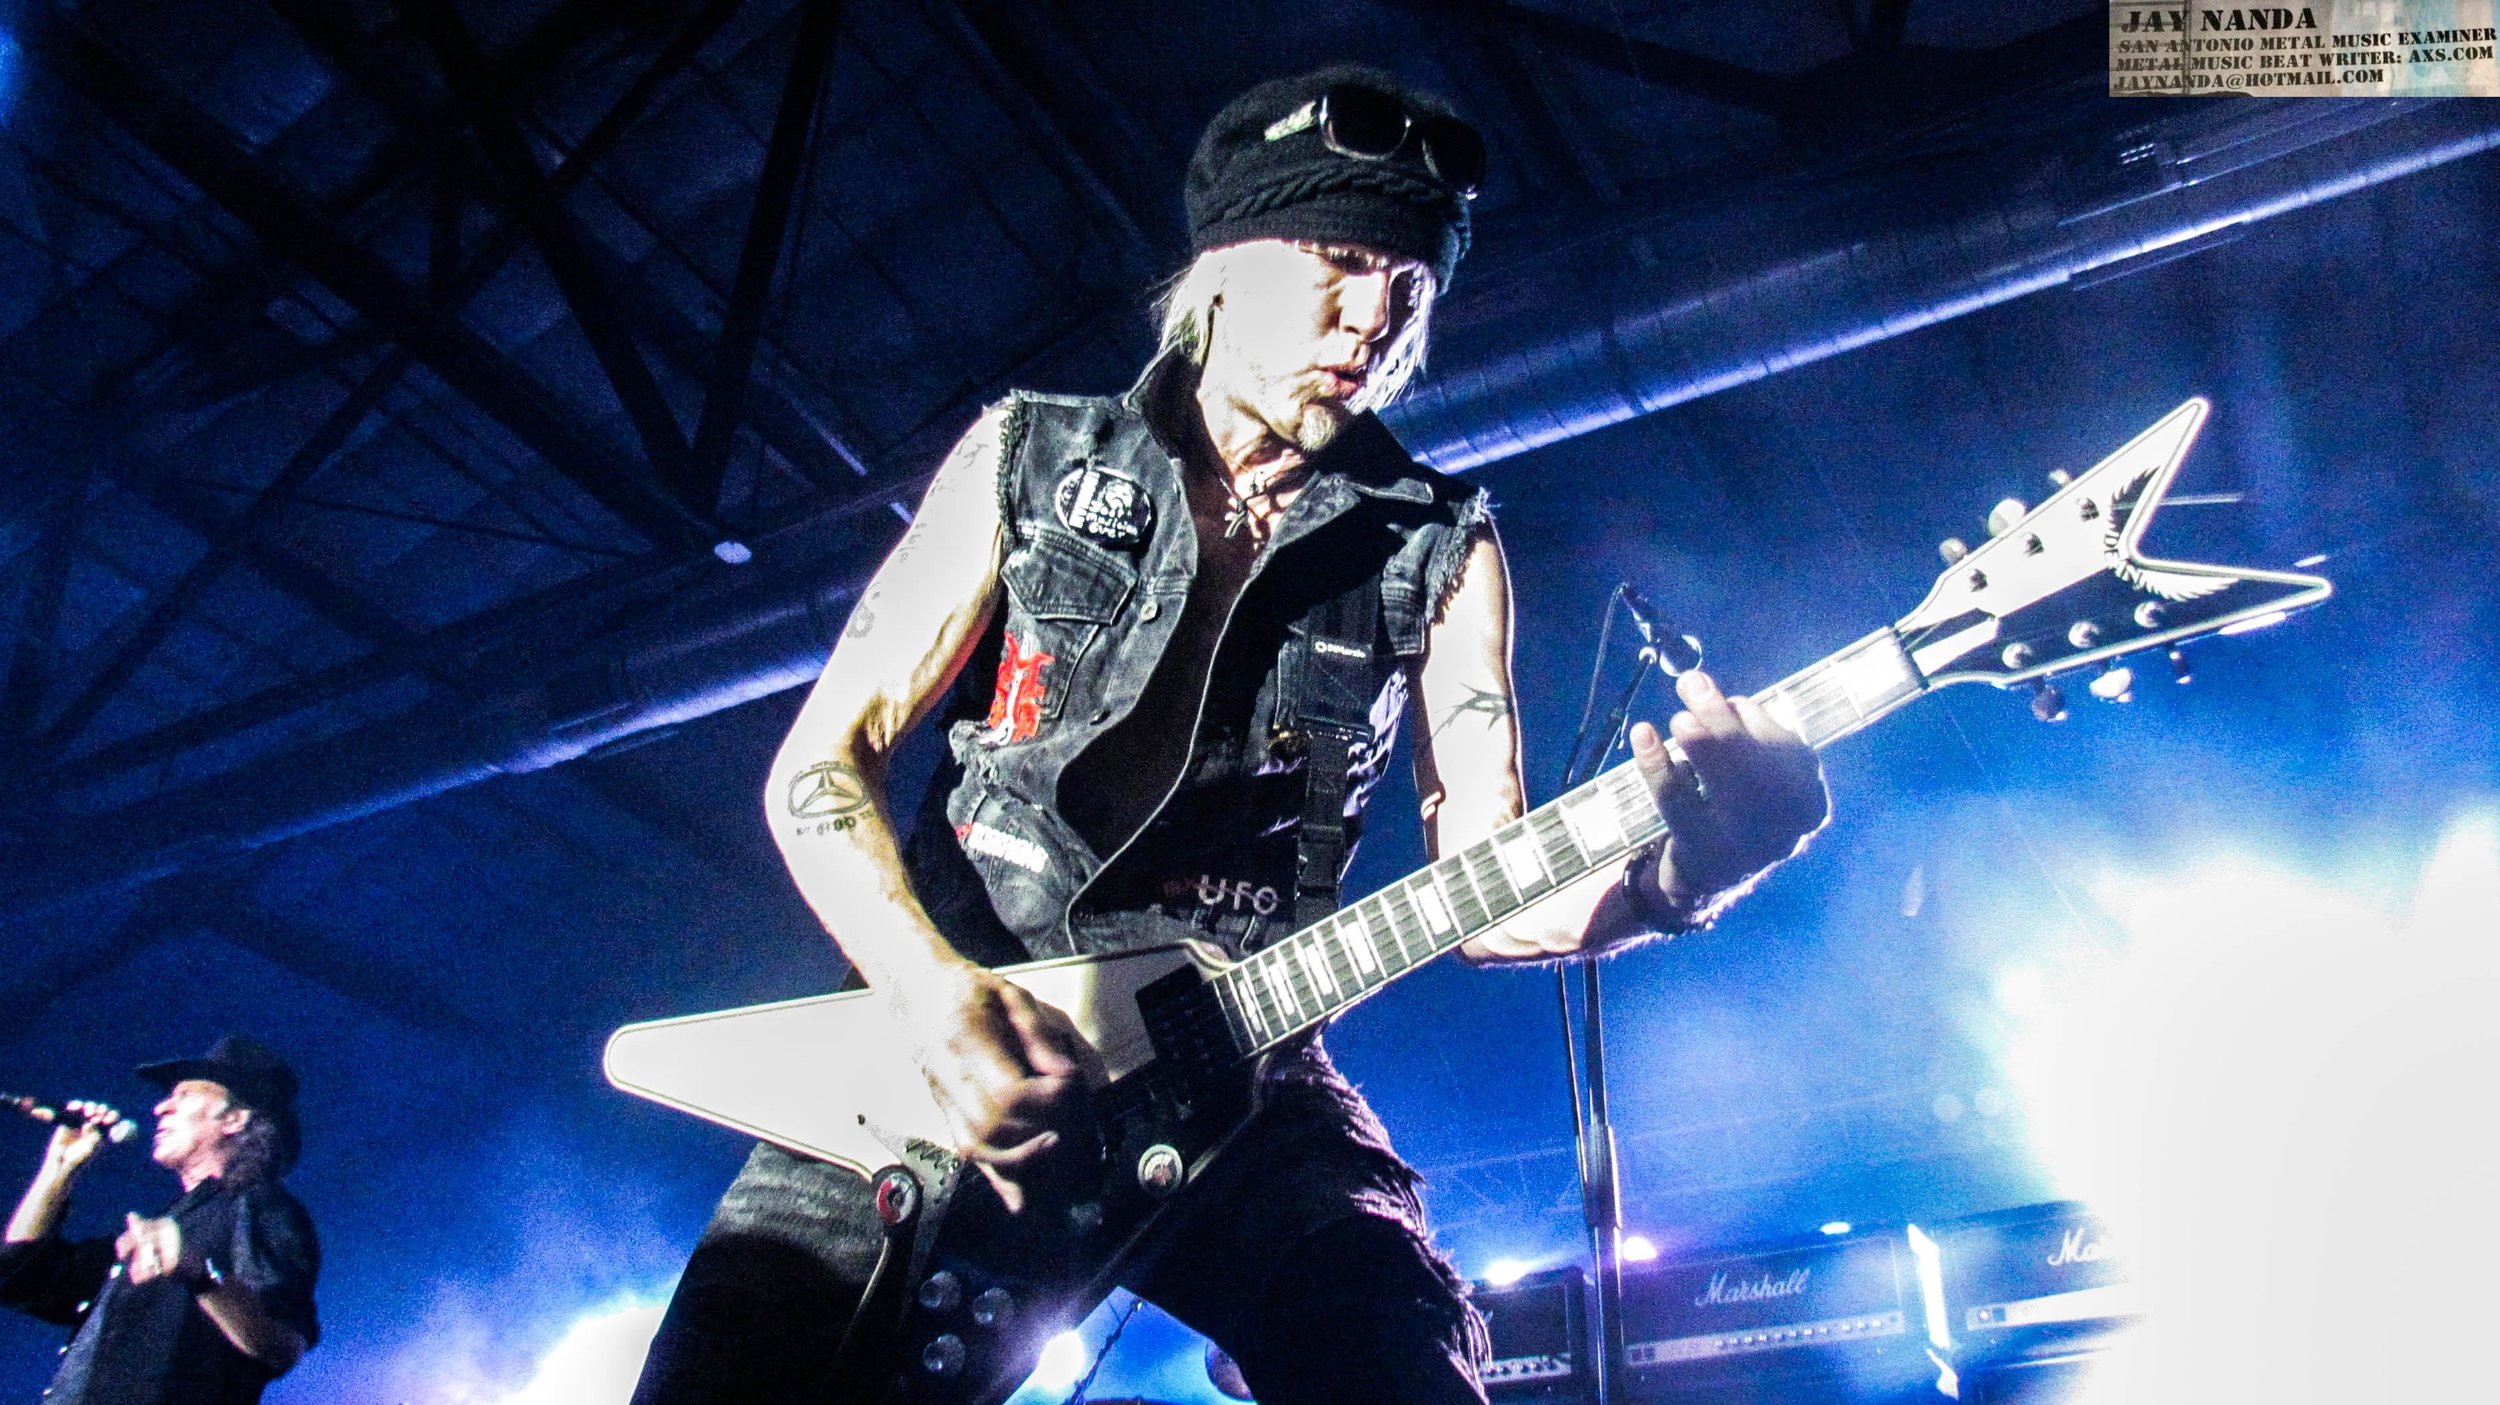  Schenker referred to himself as a "trend-maker" when he spoke to ATM prior to the show. 